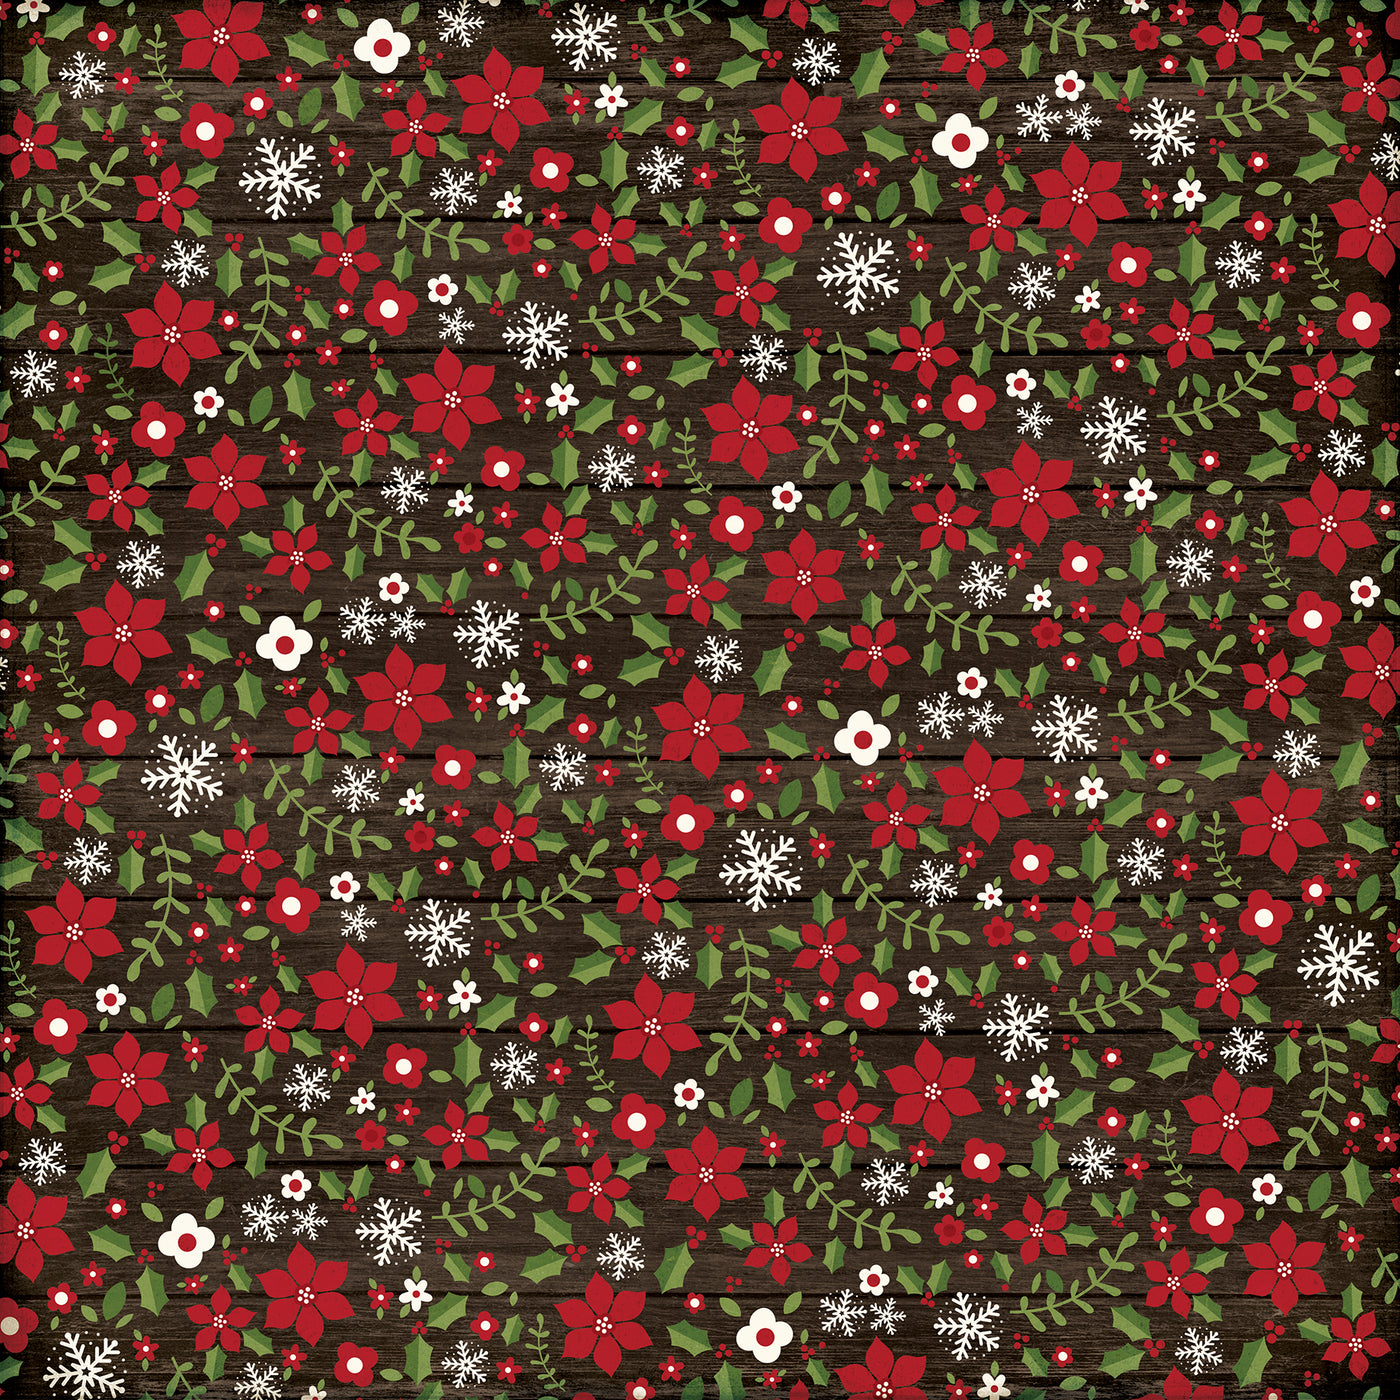 Side A - red Christmas floral with white snowflakes on a dark wood grain background